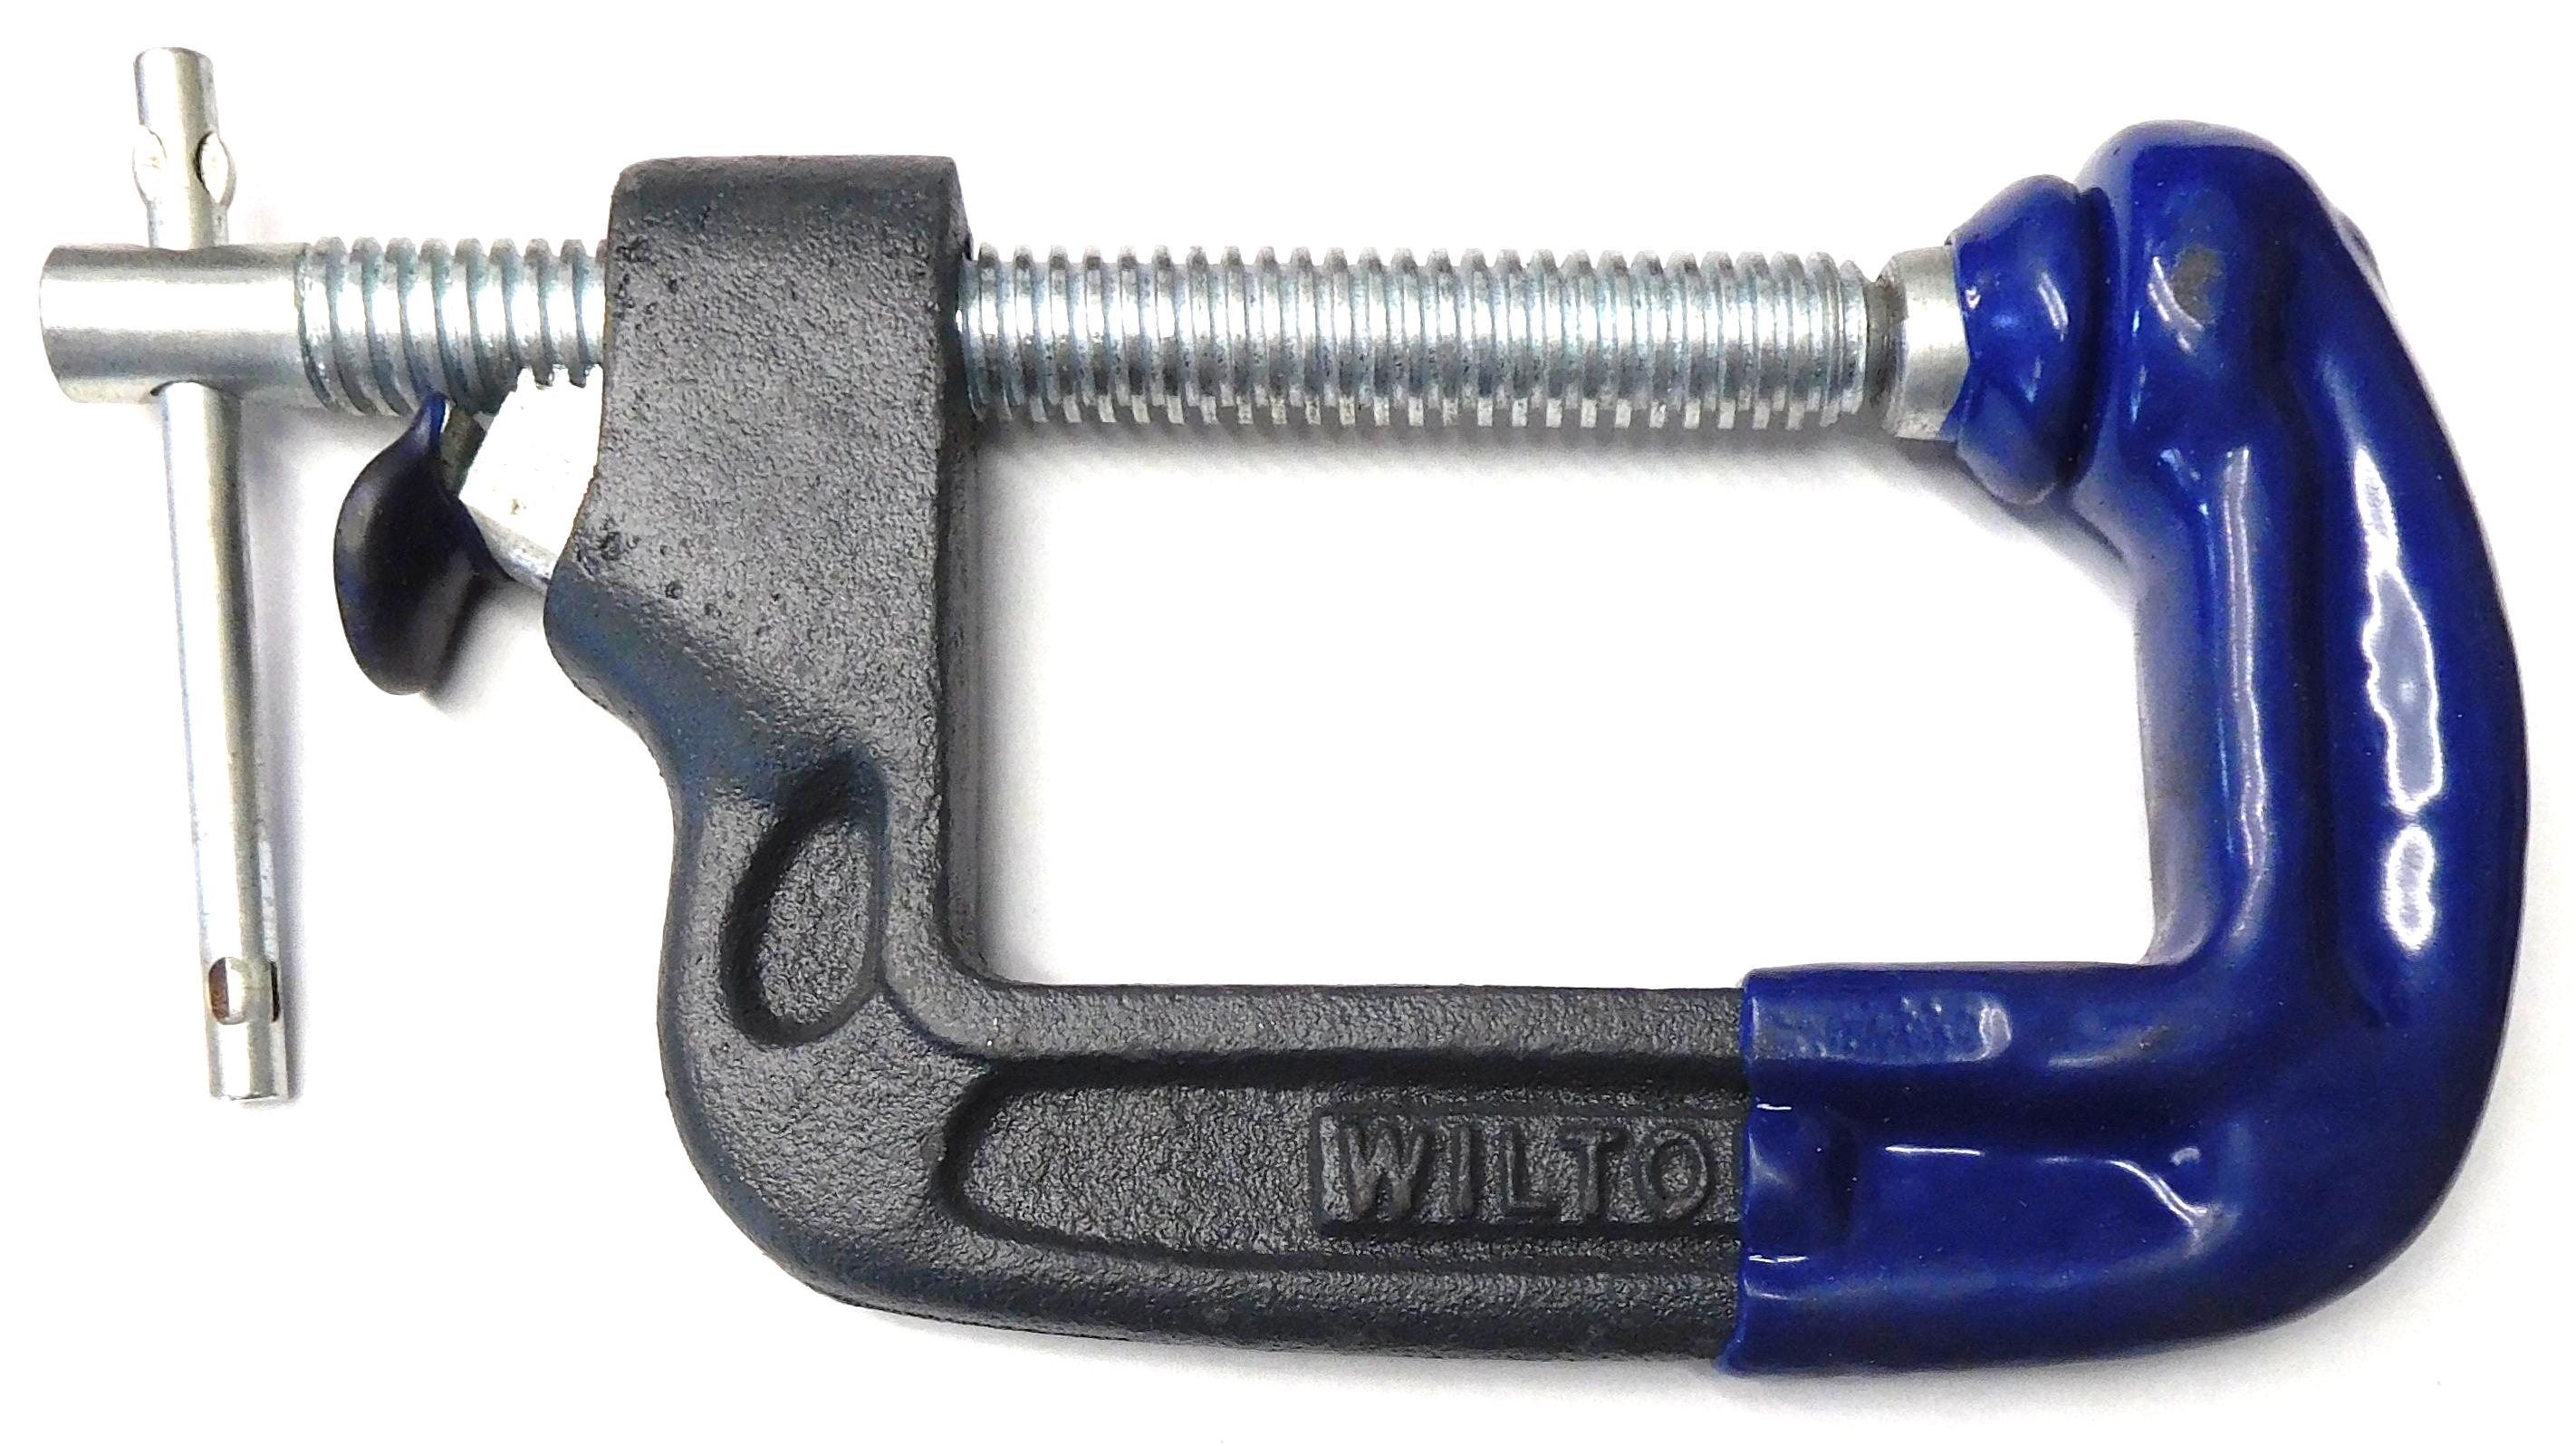 Wilton 45460 2-1/2" Quick Release C-Clamp with Rubber Coating